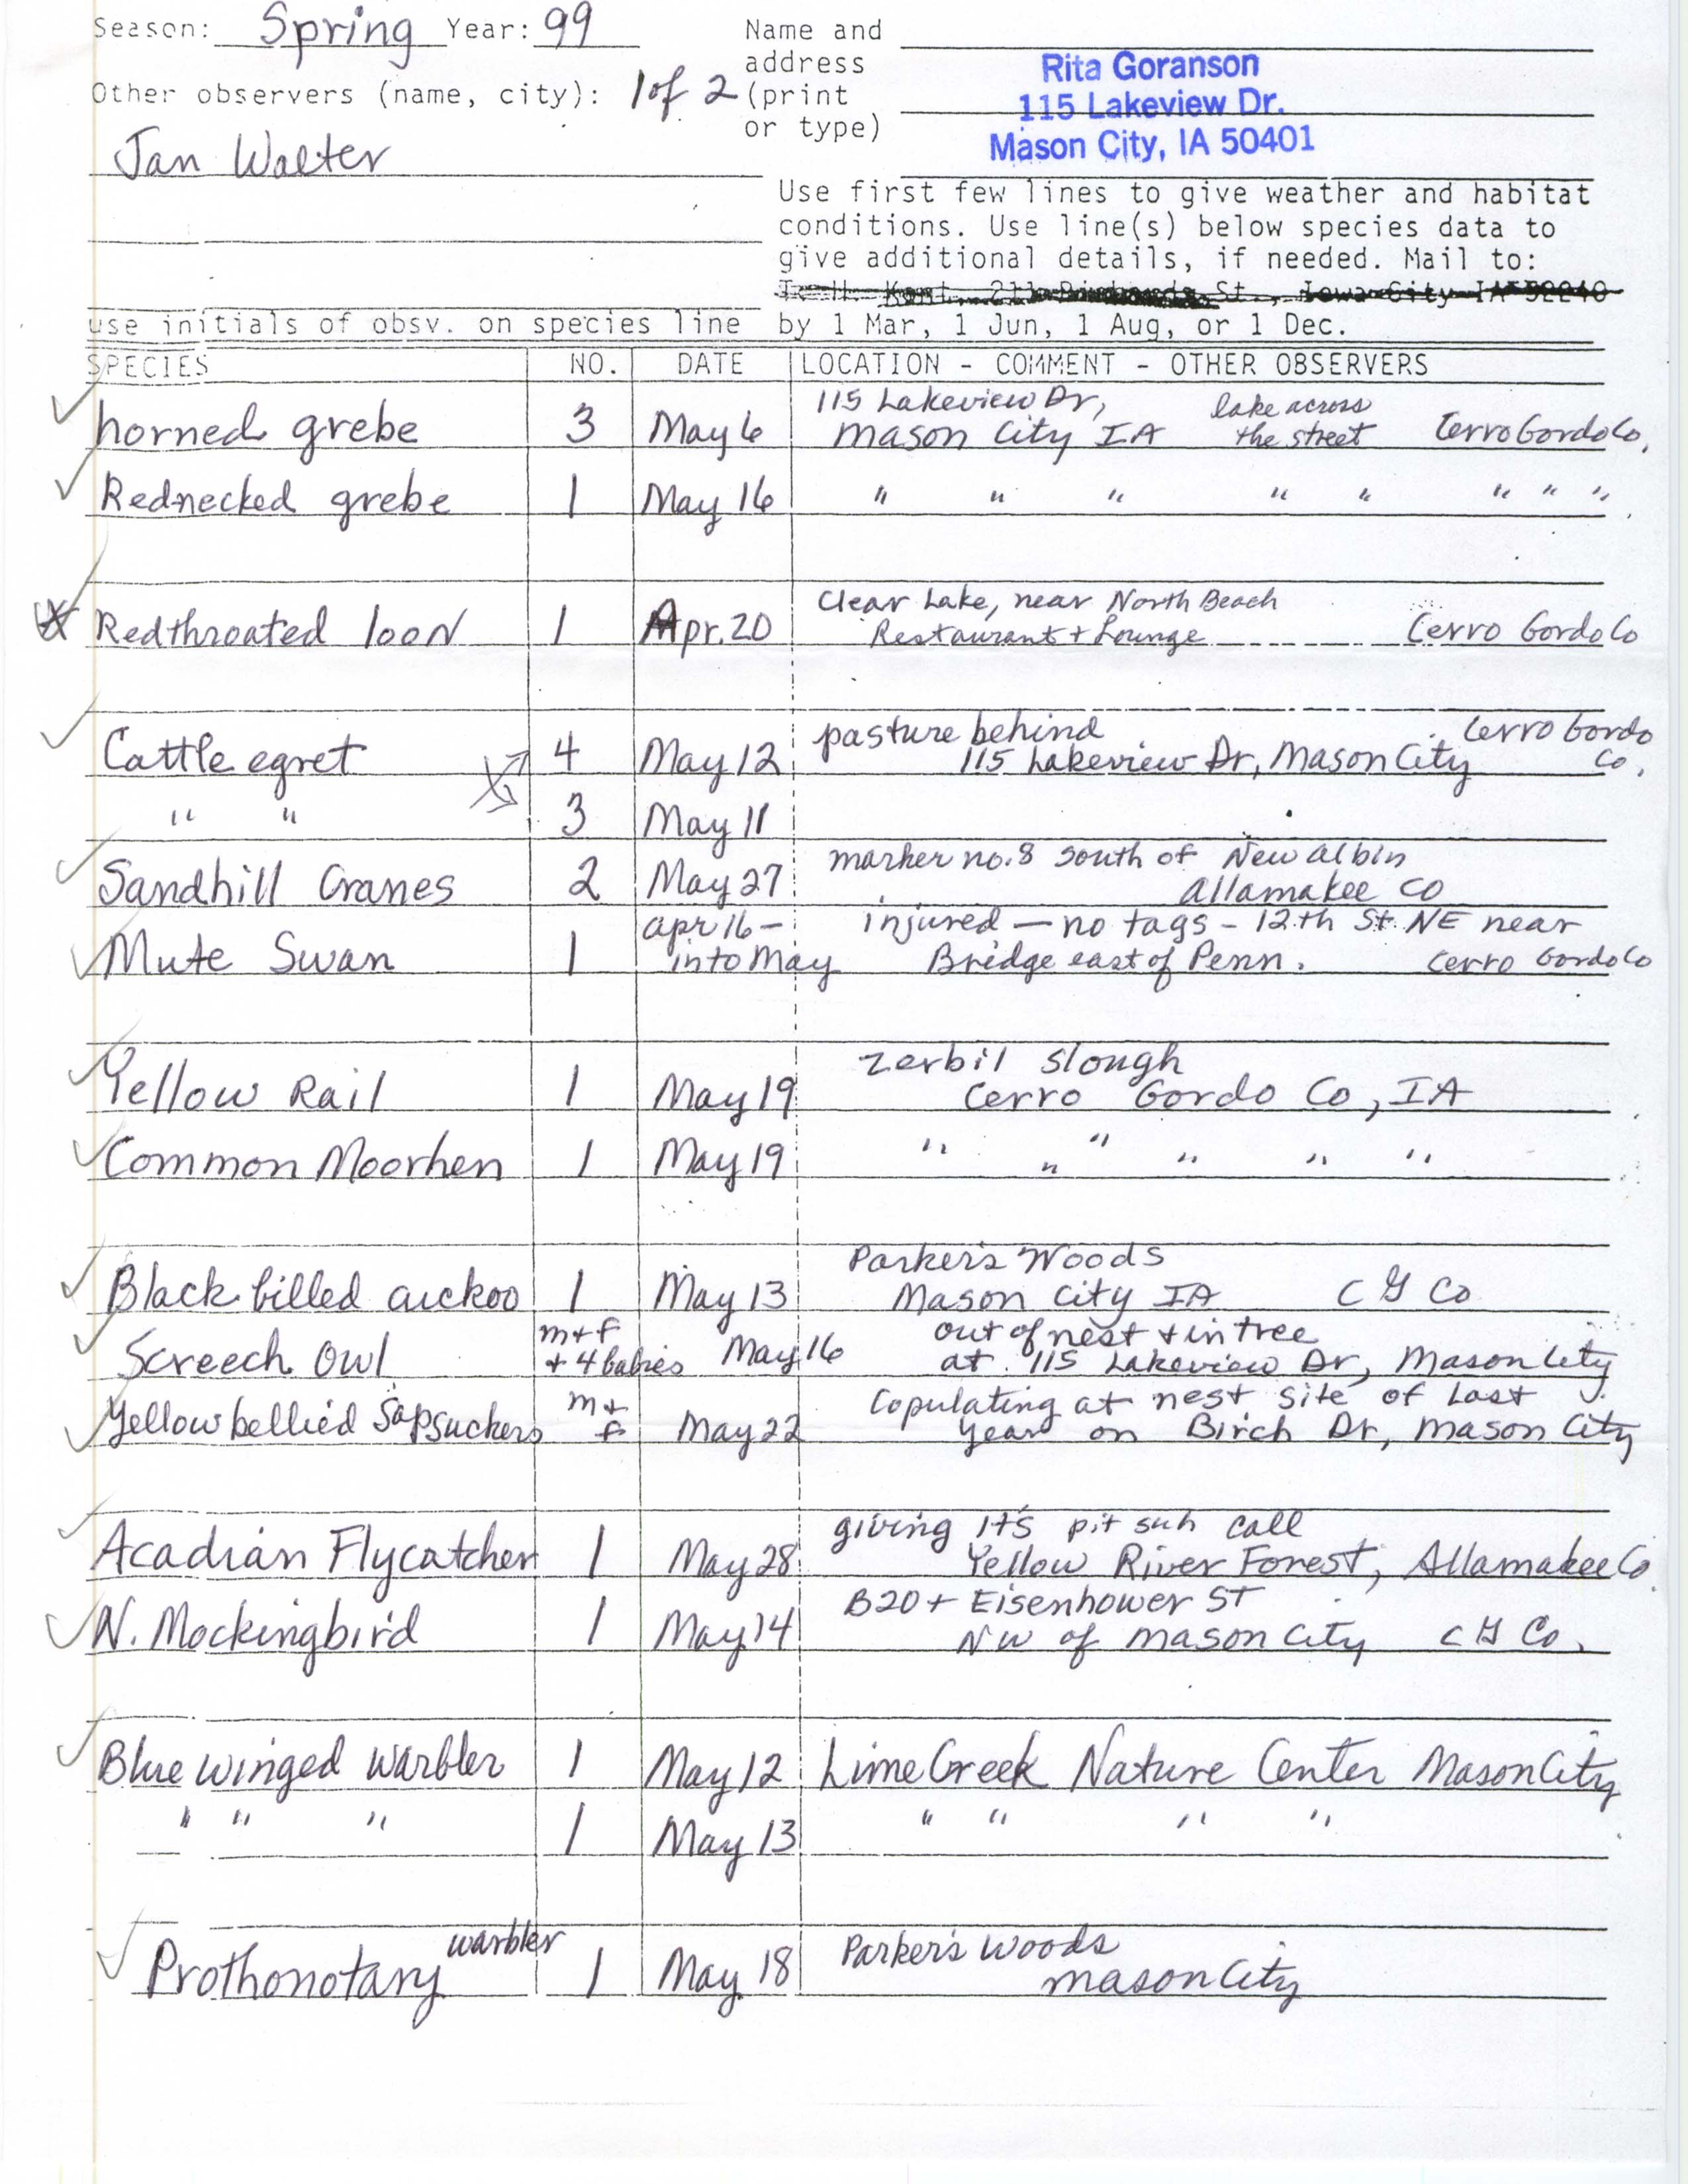 Field reports form for submitting seasonal observations of Iowa birds, Rita Goranson, spring 1999